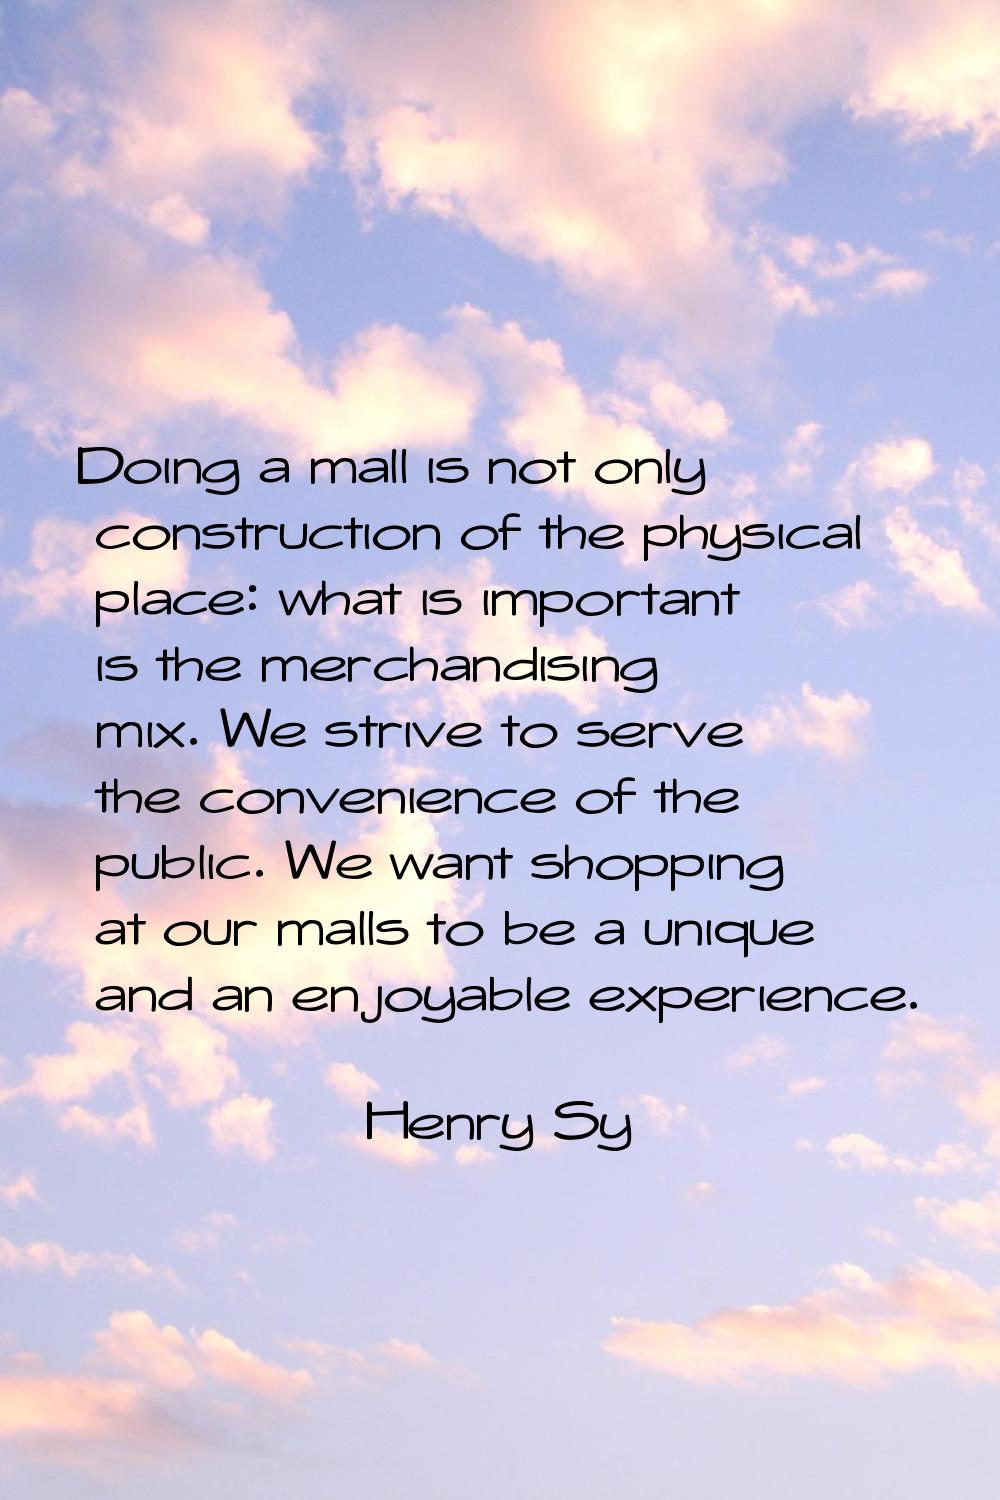 Doing a mall is not only construction of the physical place: what is important is the merchandising